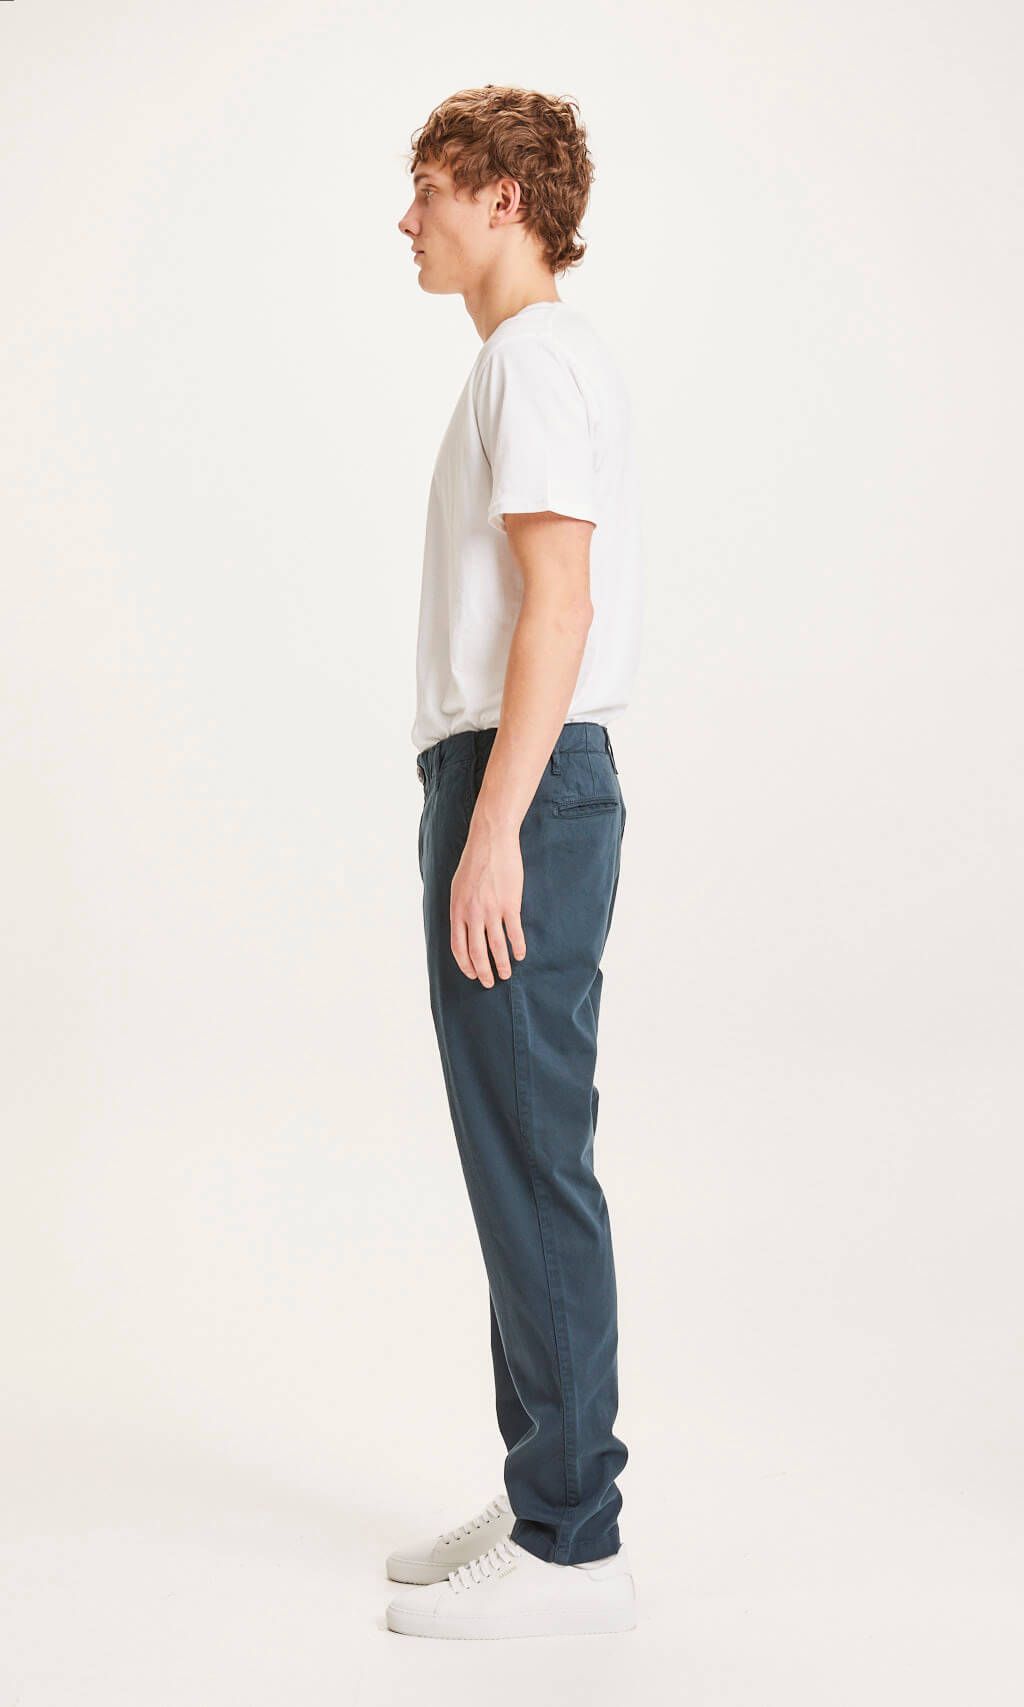 Chuck Regular Stretched Chino Pant Total Eclipse 34/32